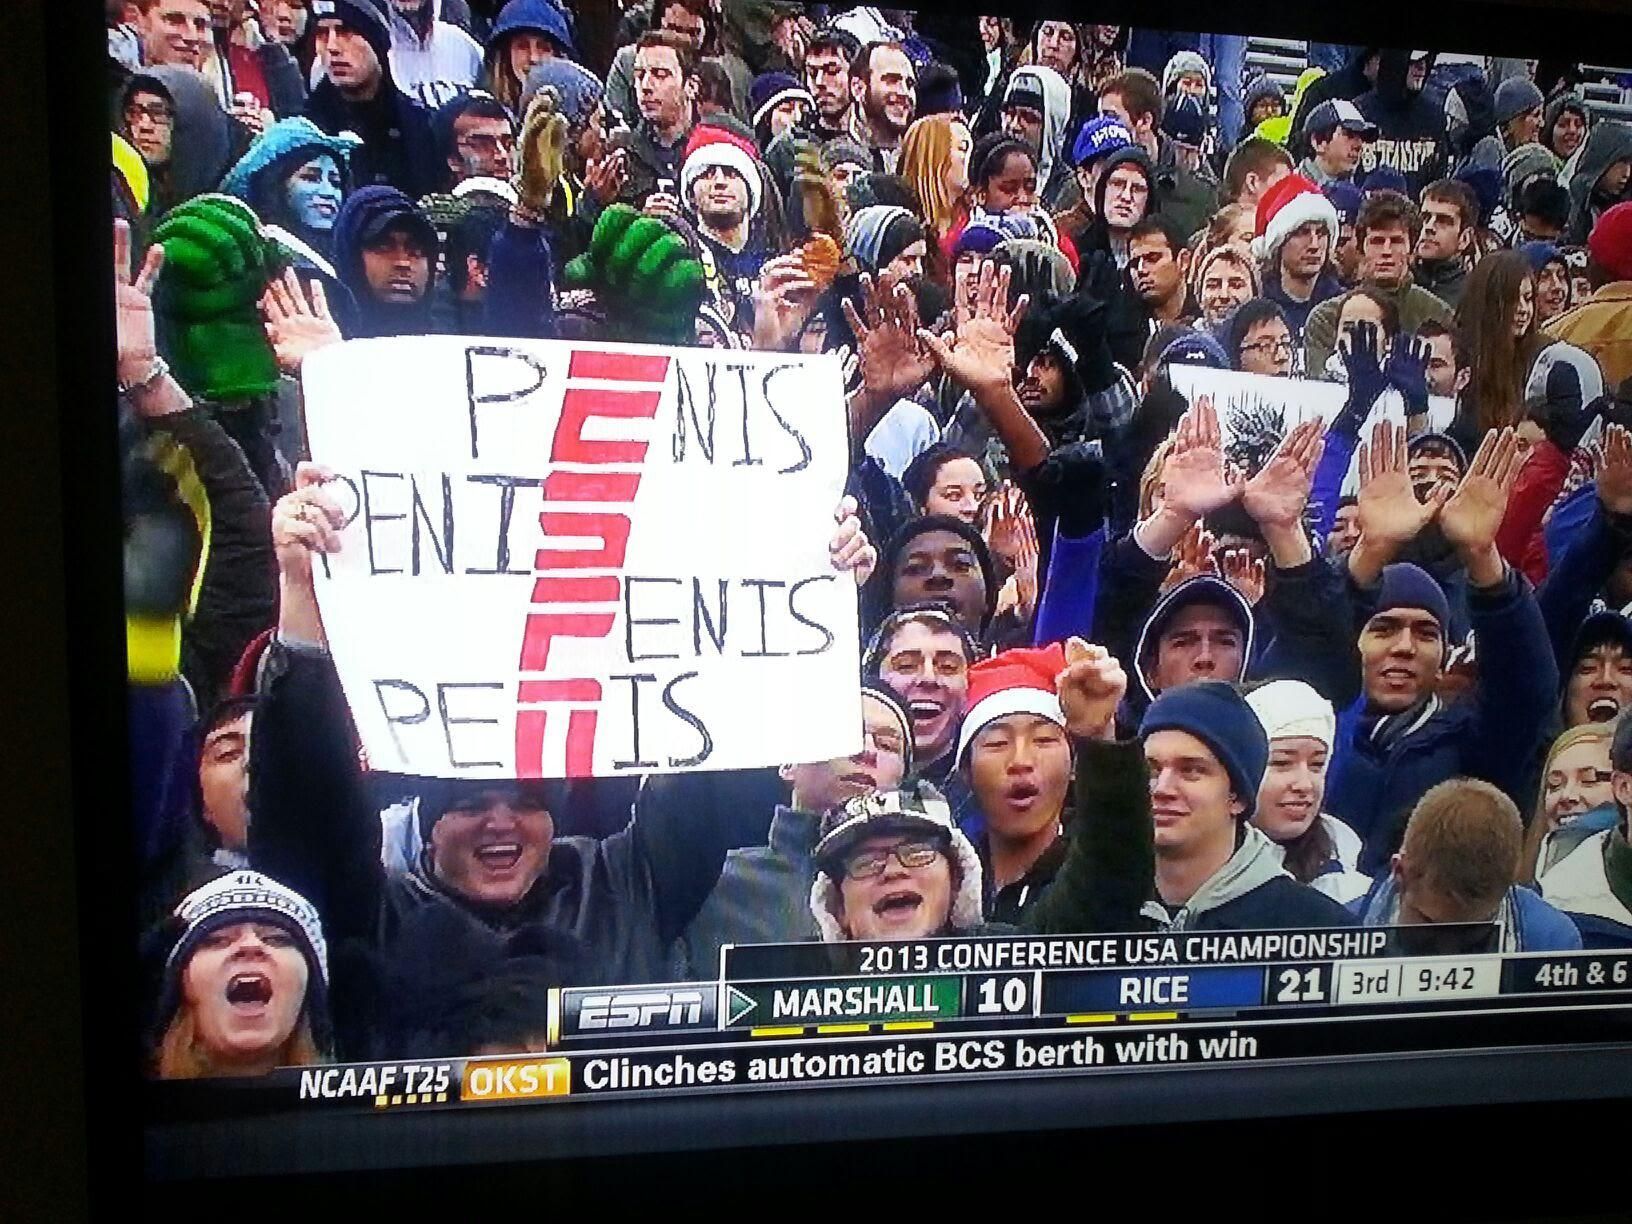 Looking back, 2013 was a great year for ESPN